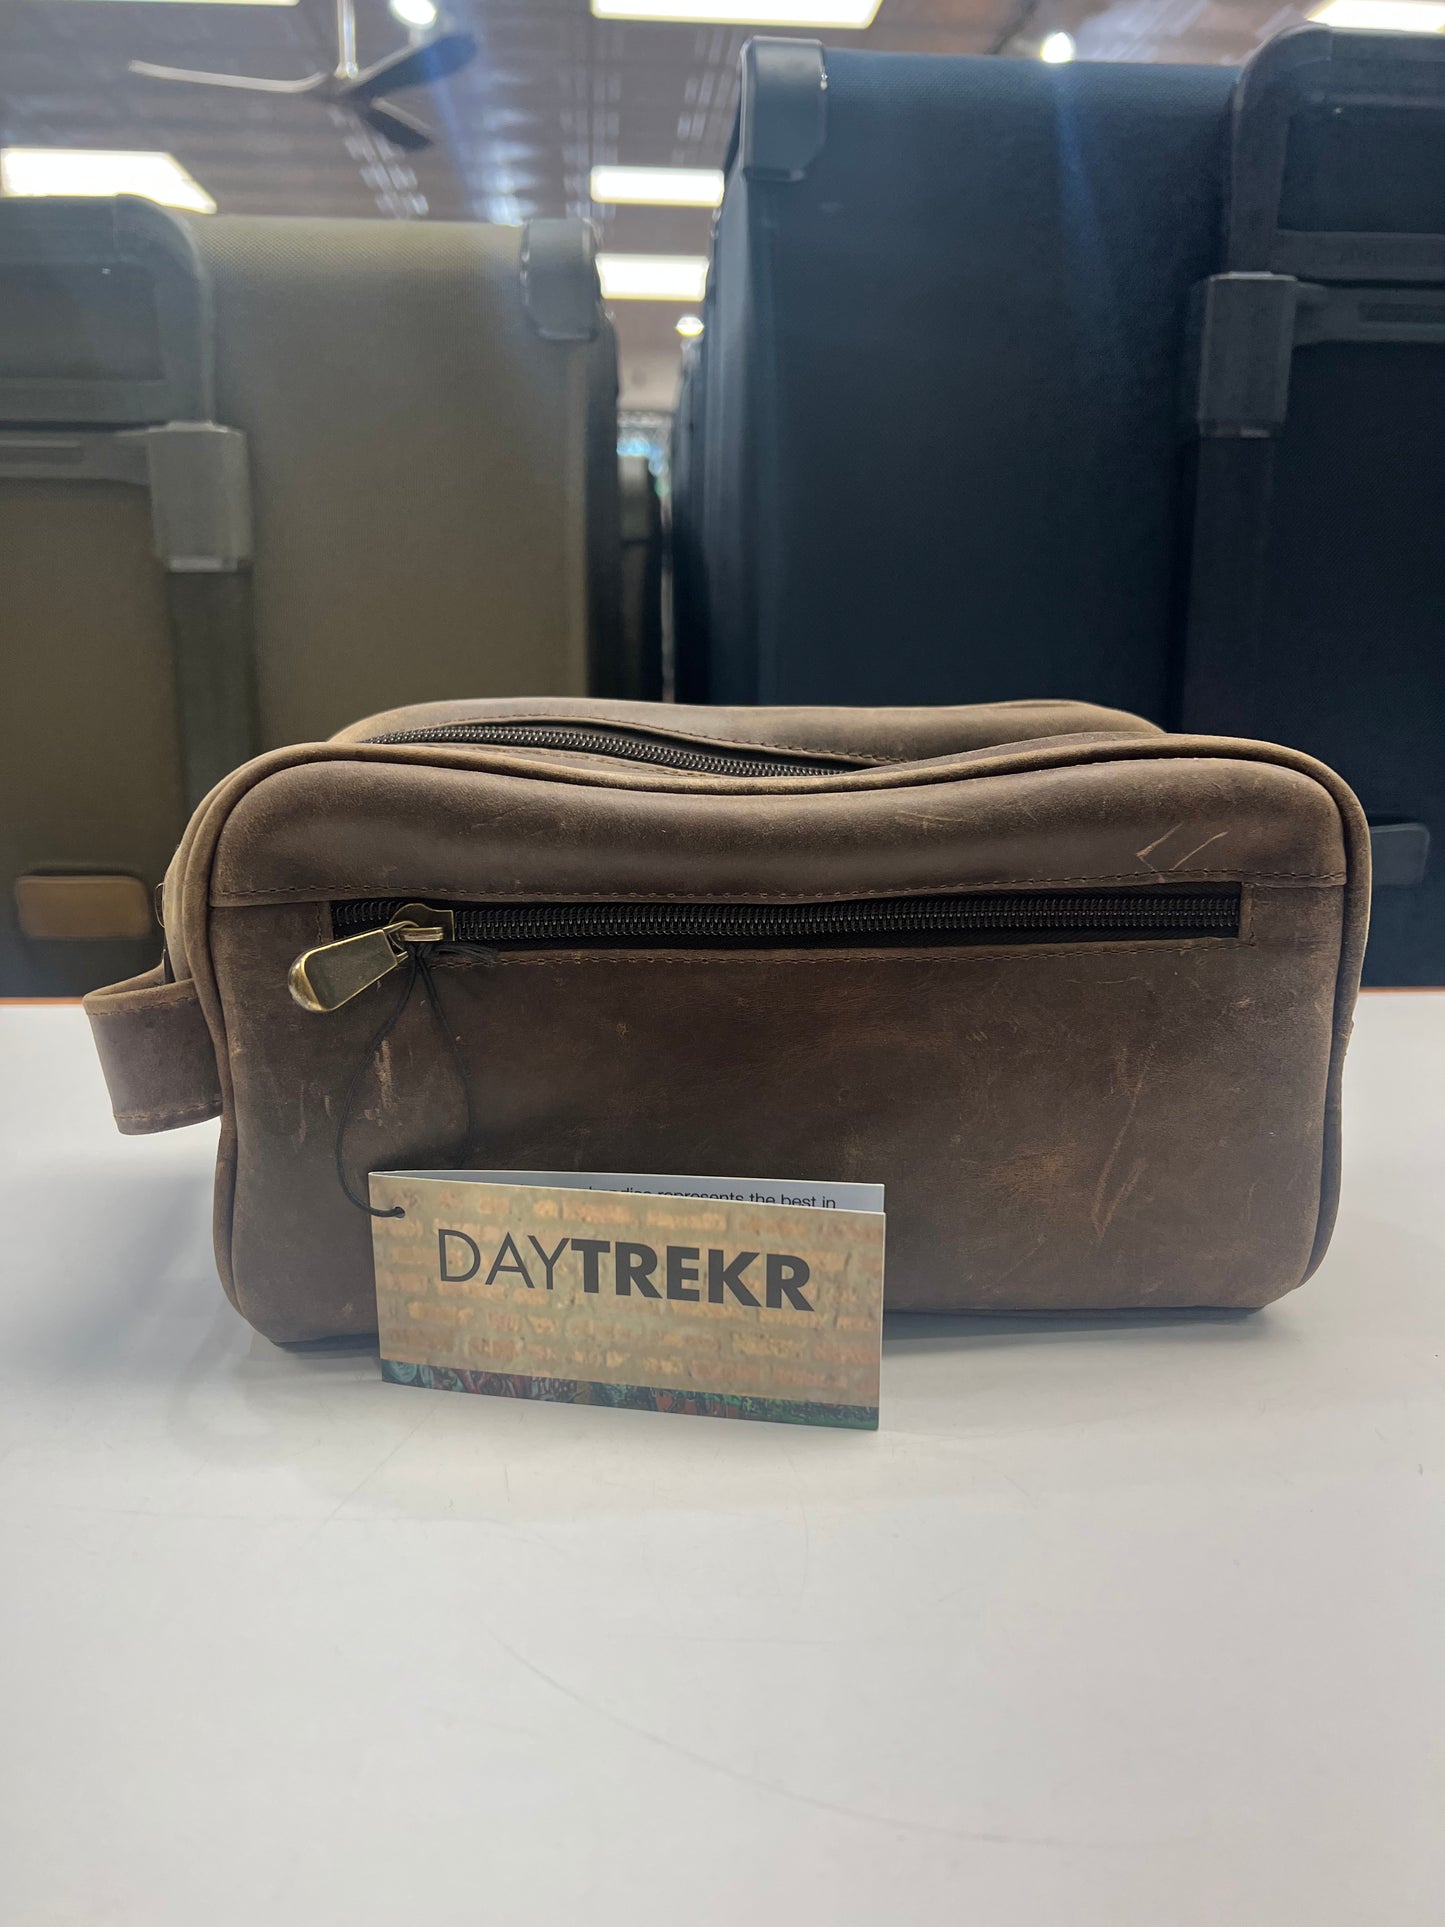 On Sale- DAYTREKR Leather Toiletry Bag